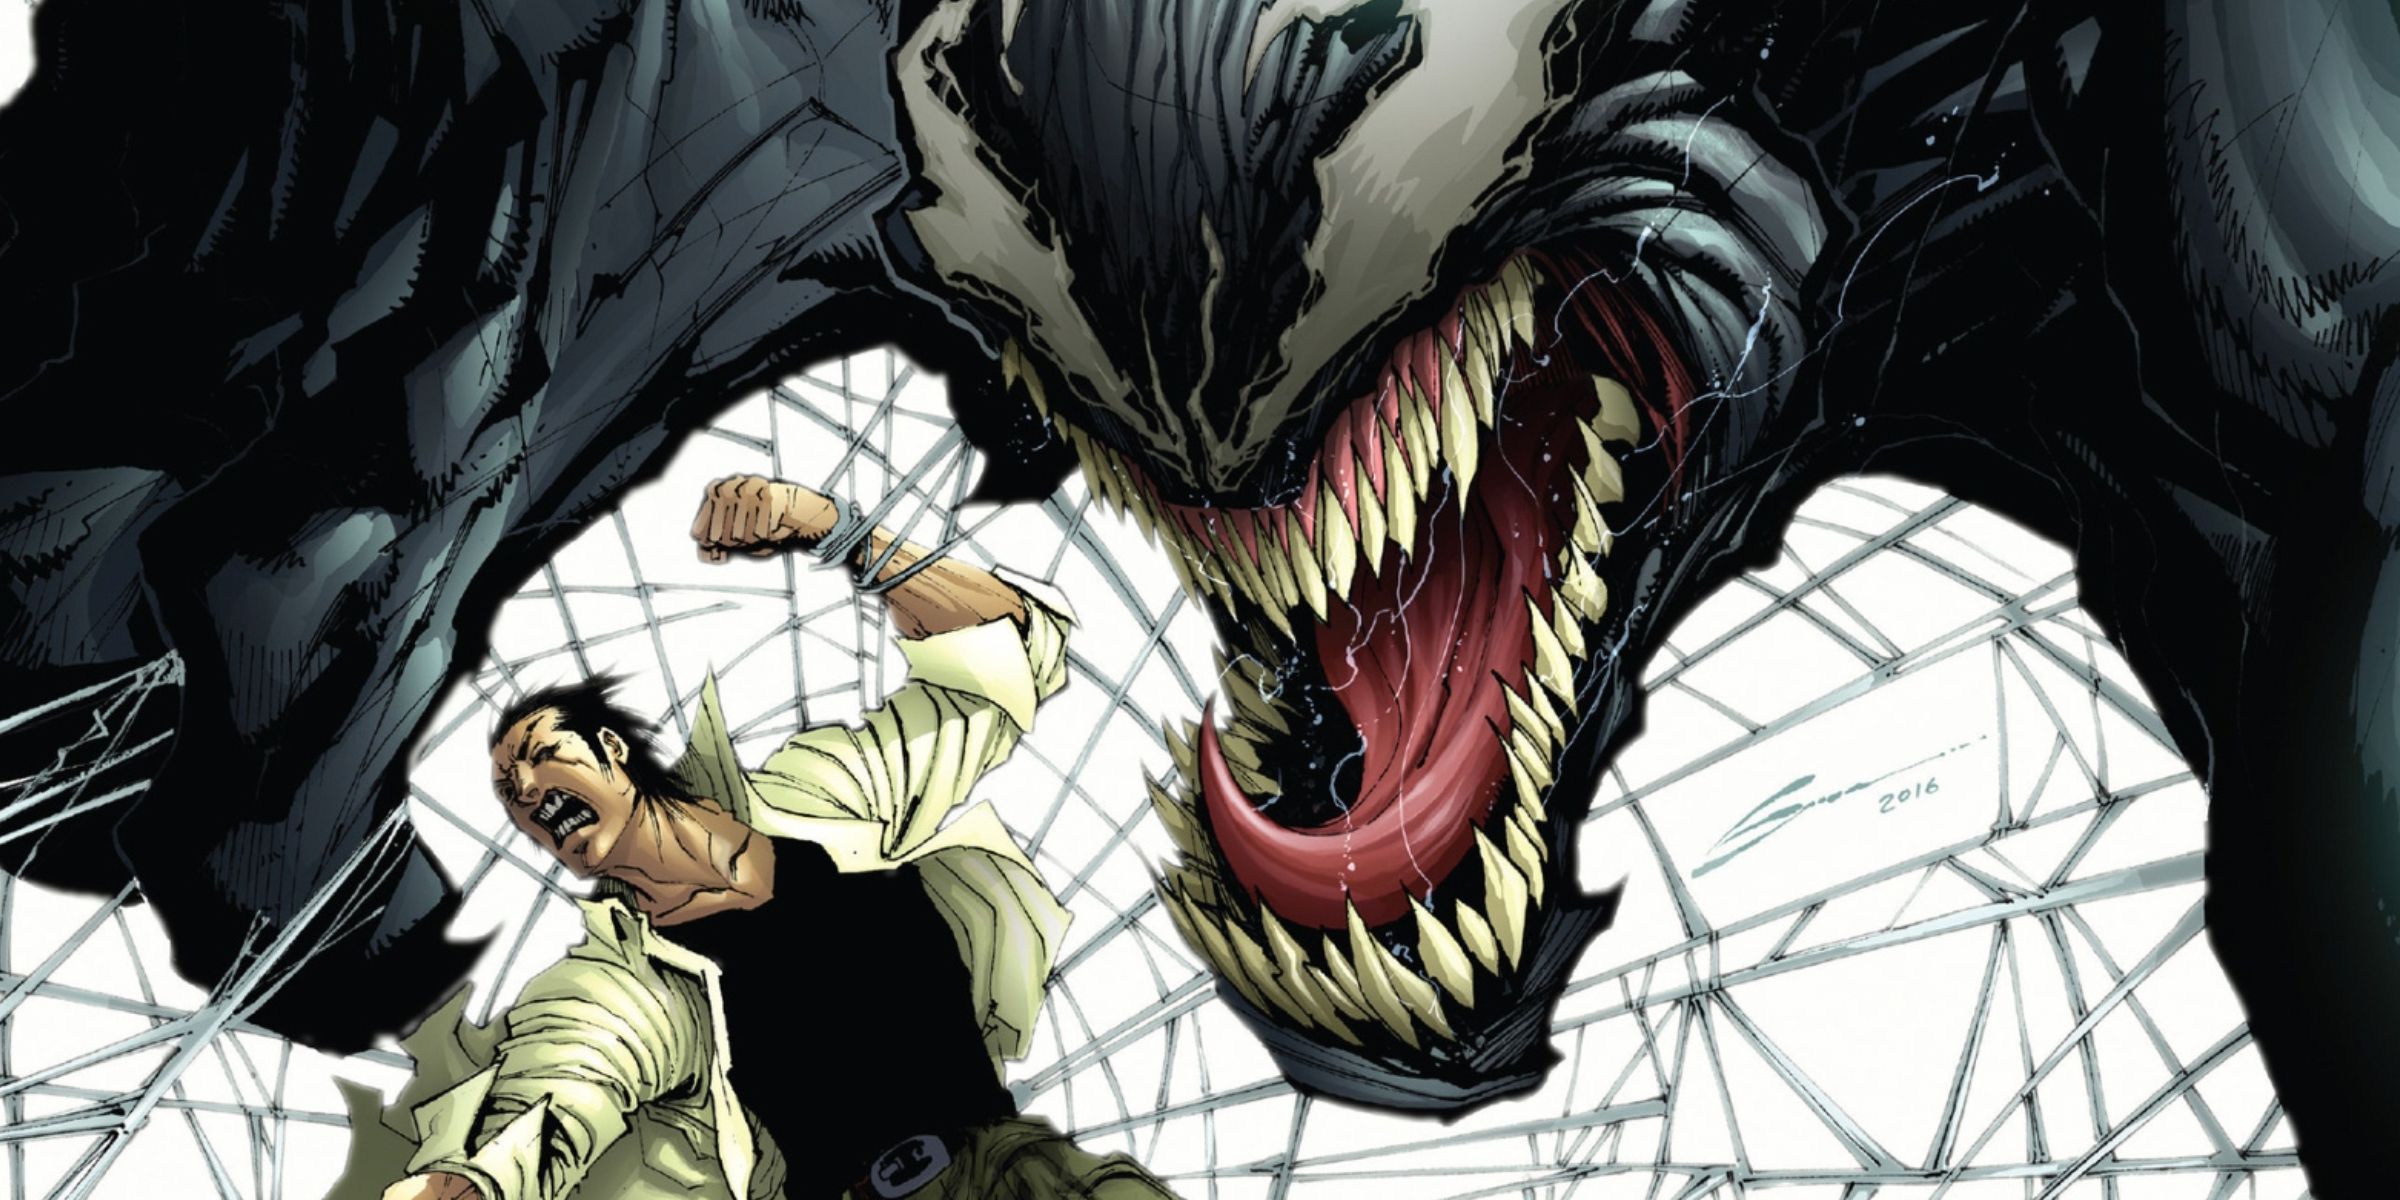 Venom goes after an adversary with his mouth wide open on a Venom comic book cover